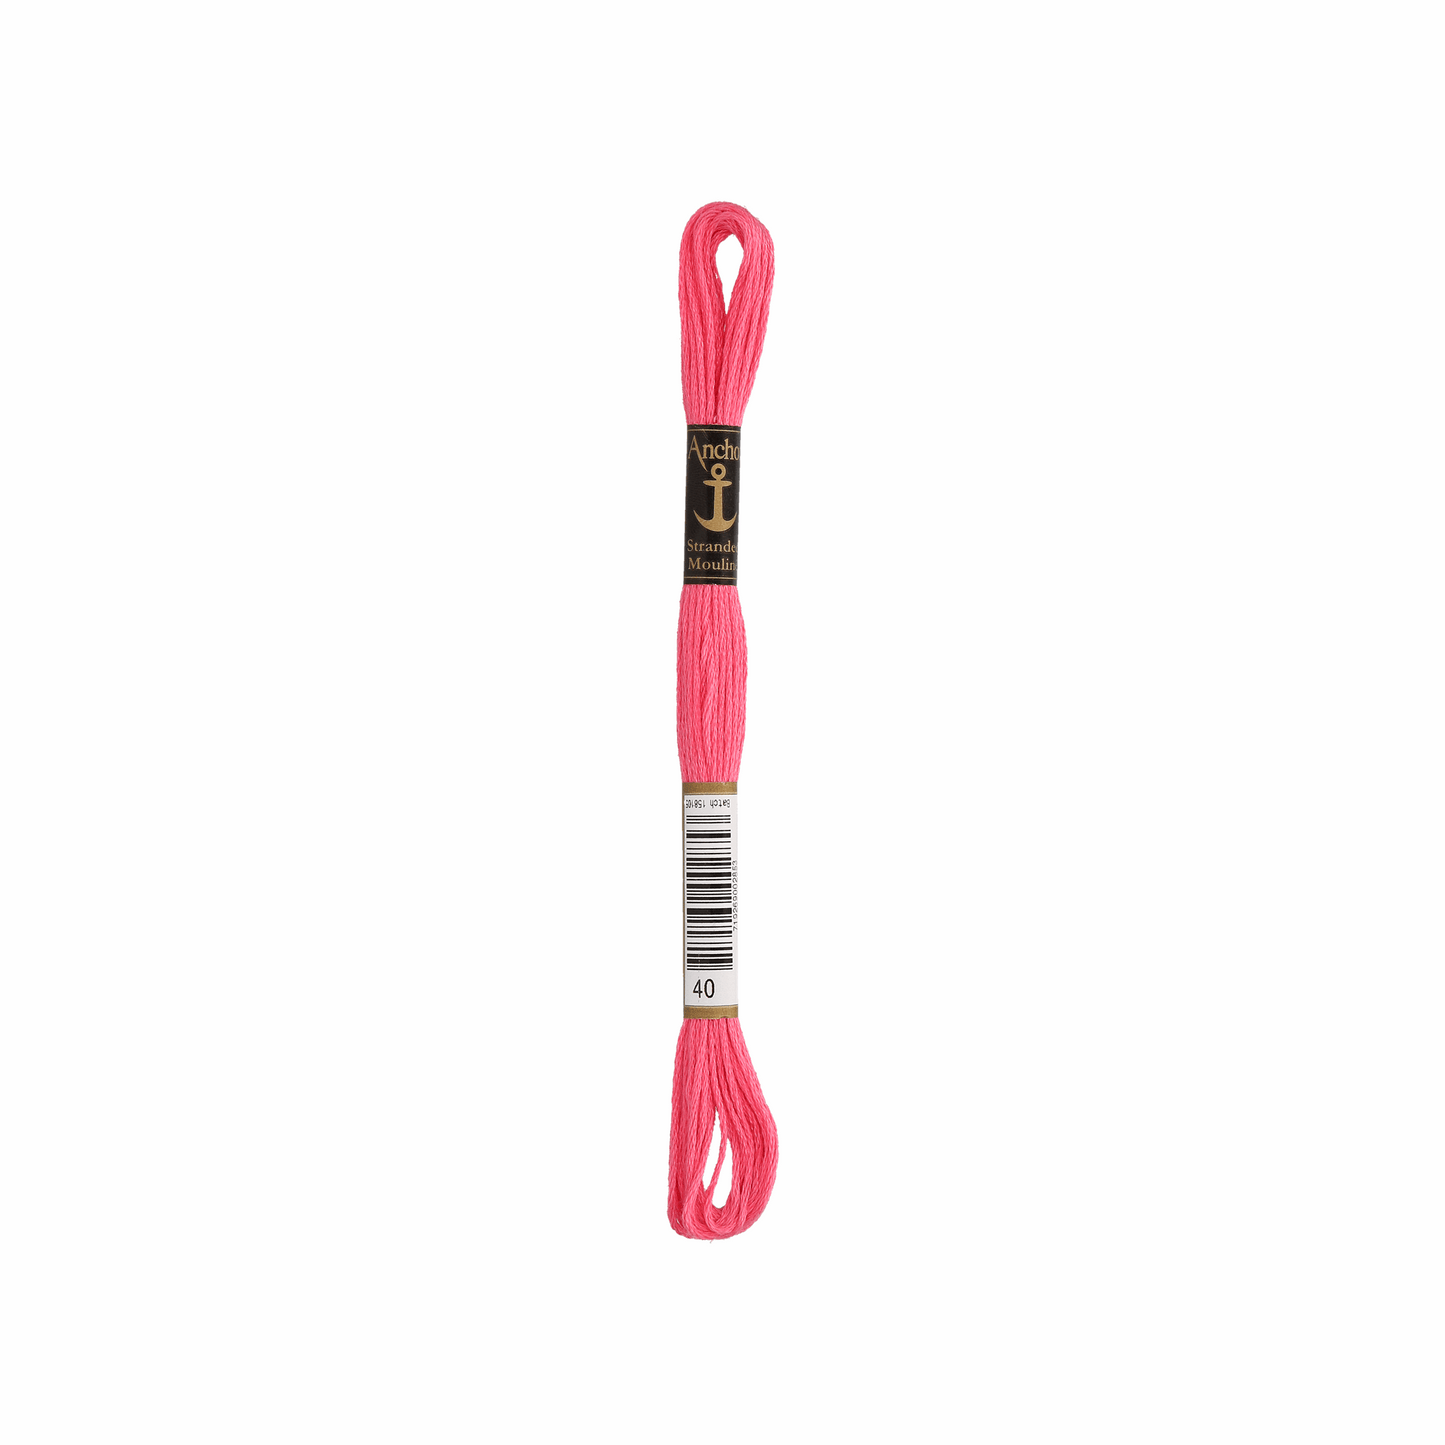 Anchor embroidery thread, 2g, colour 40 light pink